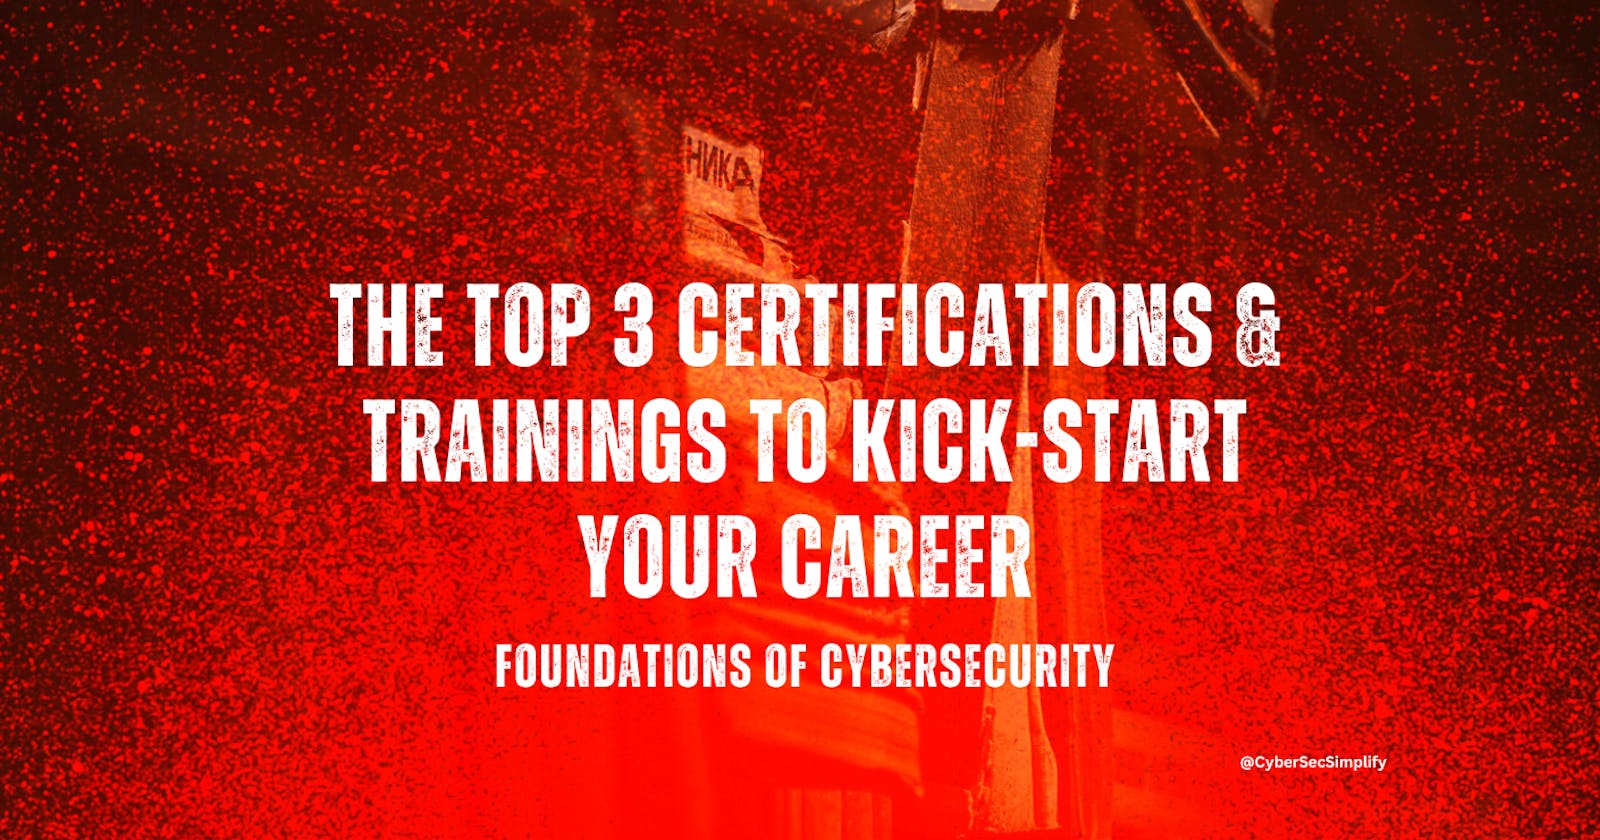 Cyber Foundation - Discover the Top 3 Certifications and Training